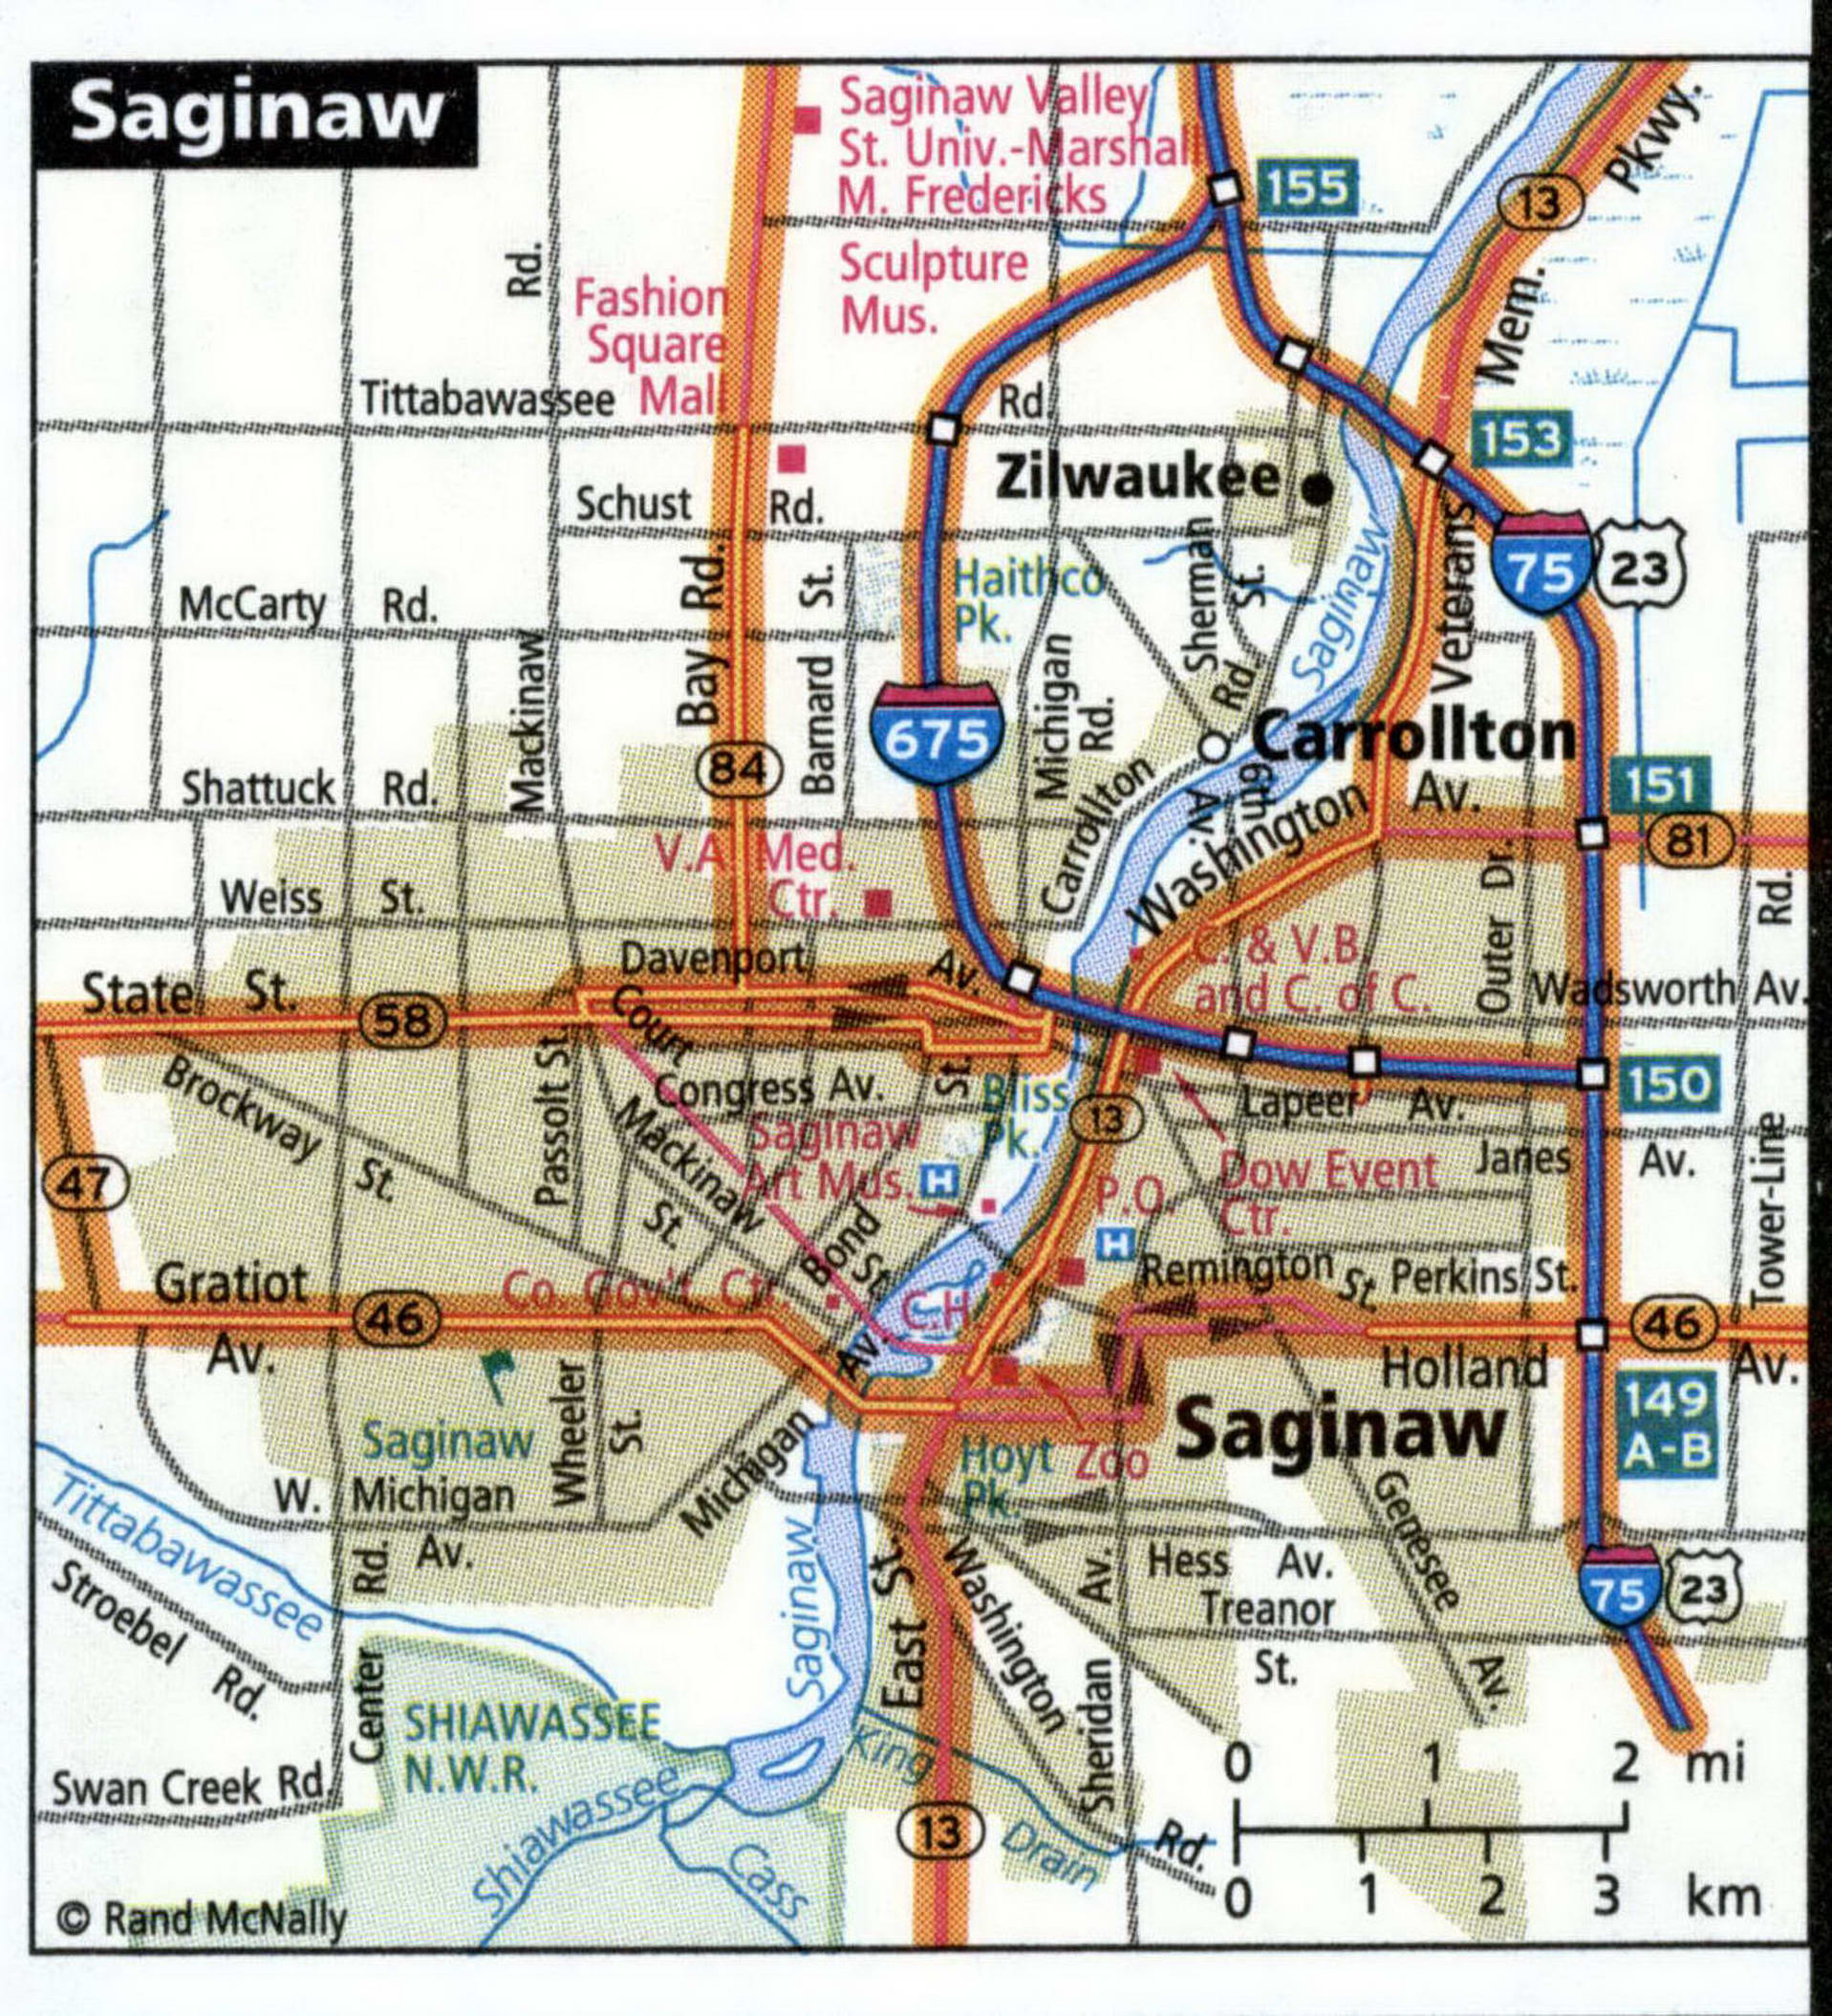 Saginaw city road map for truck drivers area town toll free highways ...